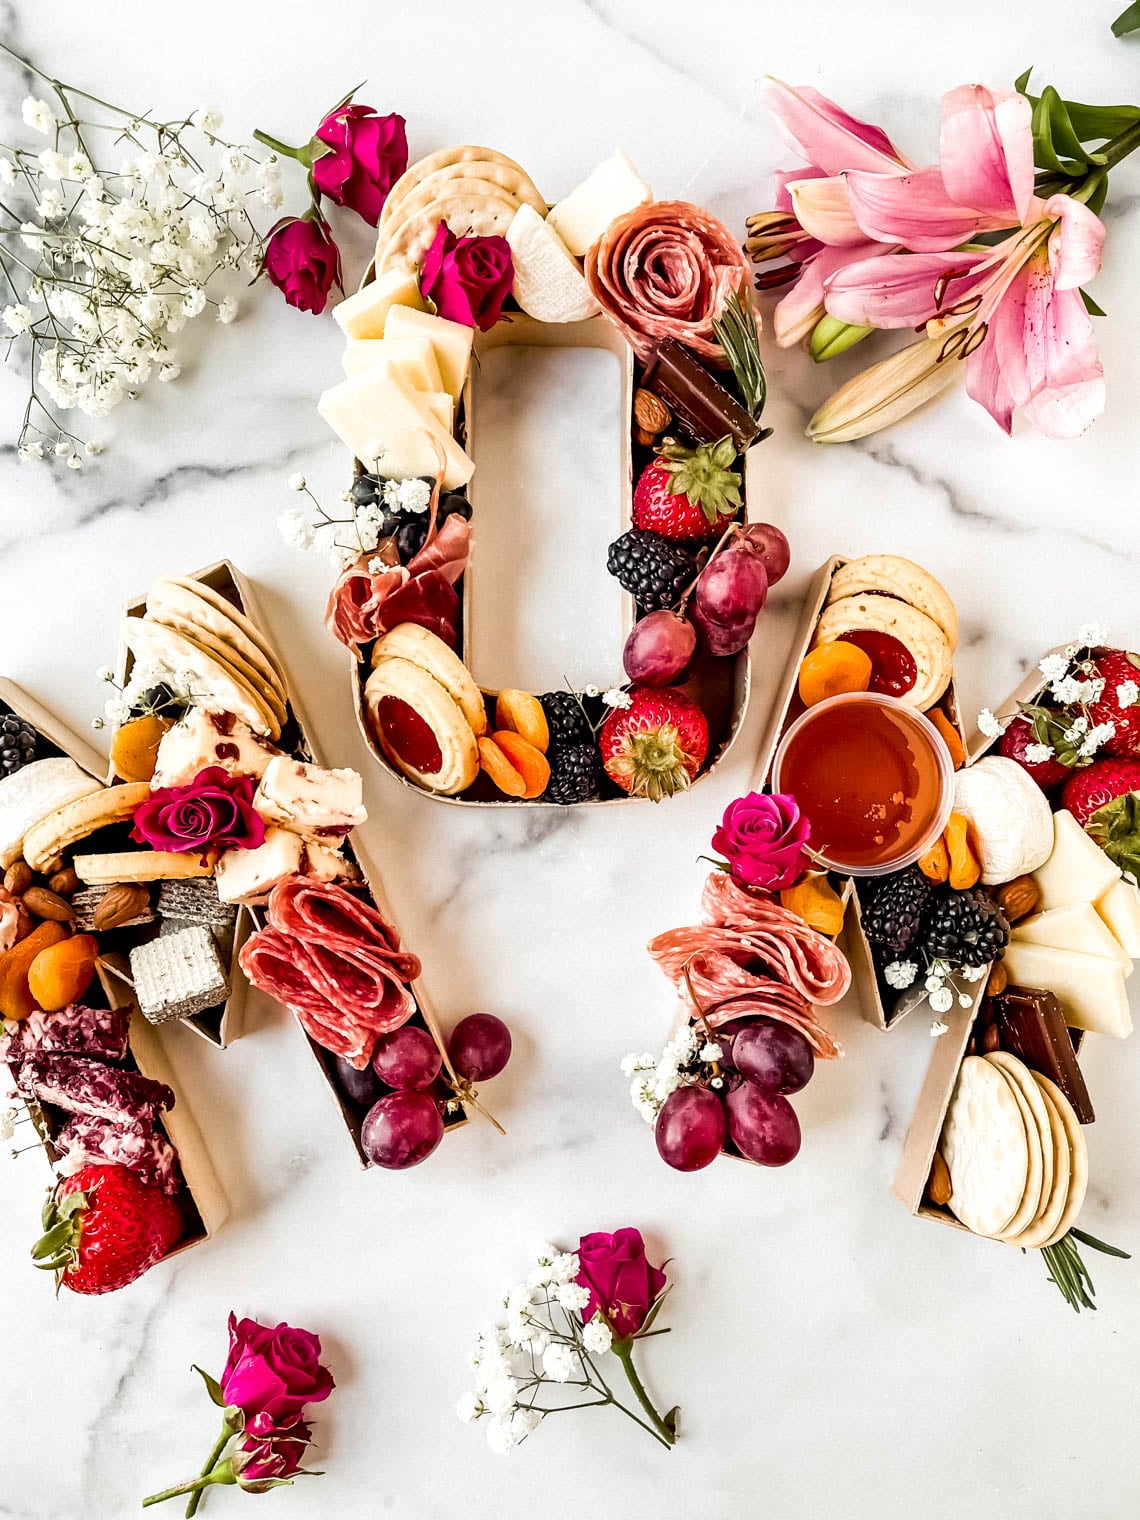 A Mother's Day Charcuterie board that spells out the word "Mom"